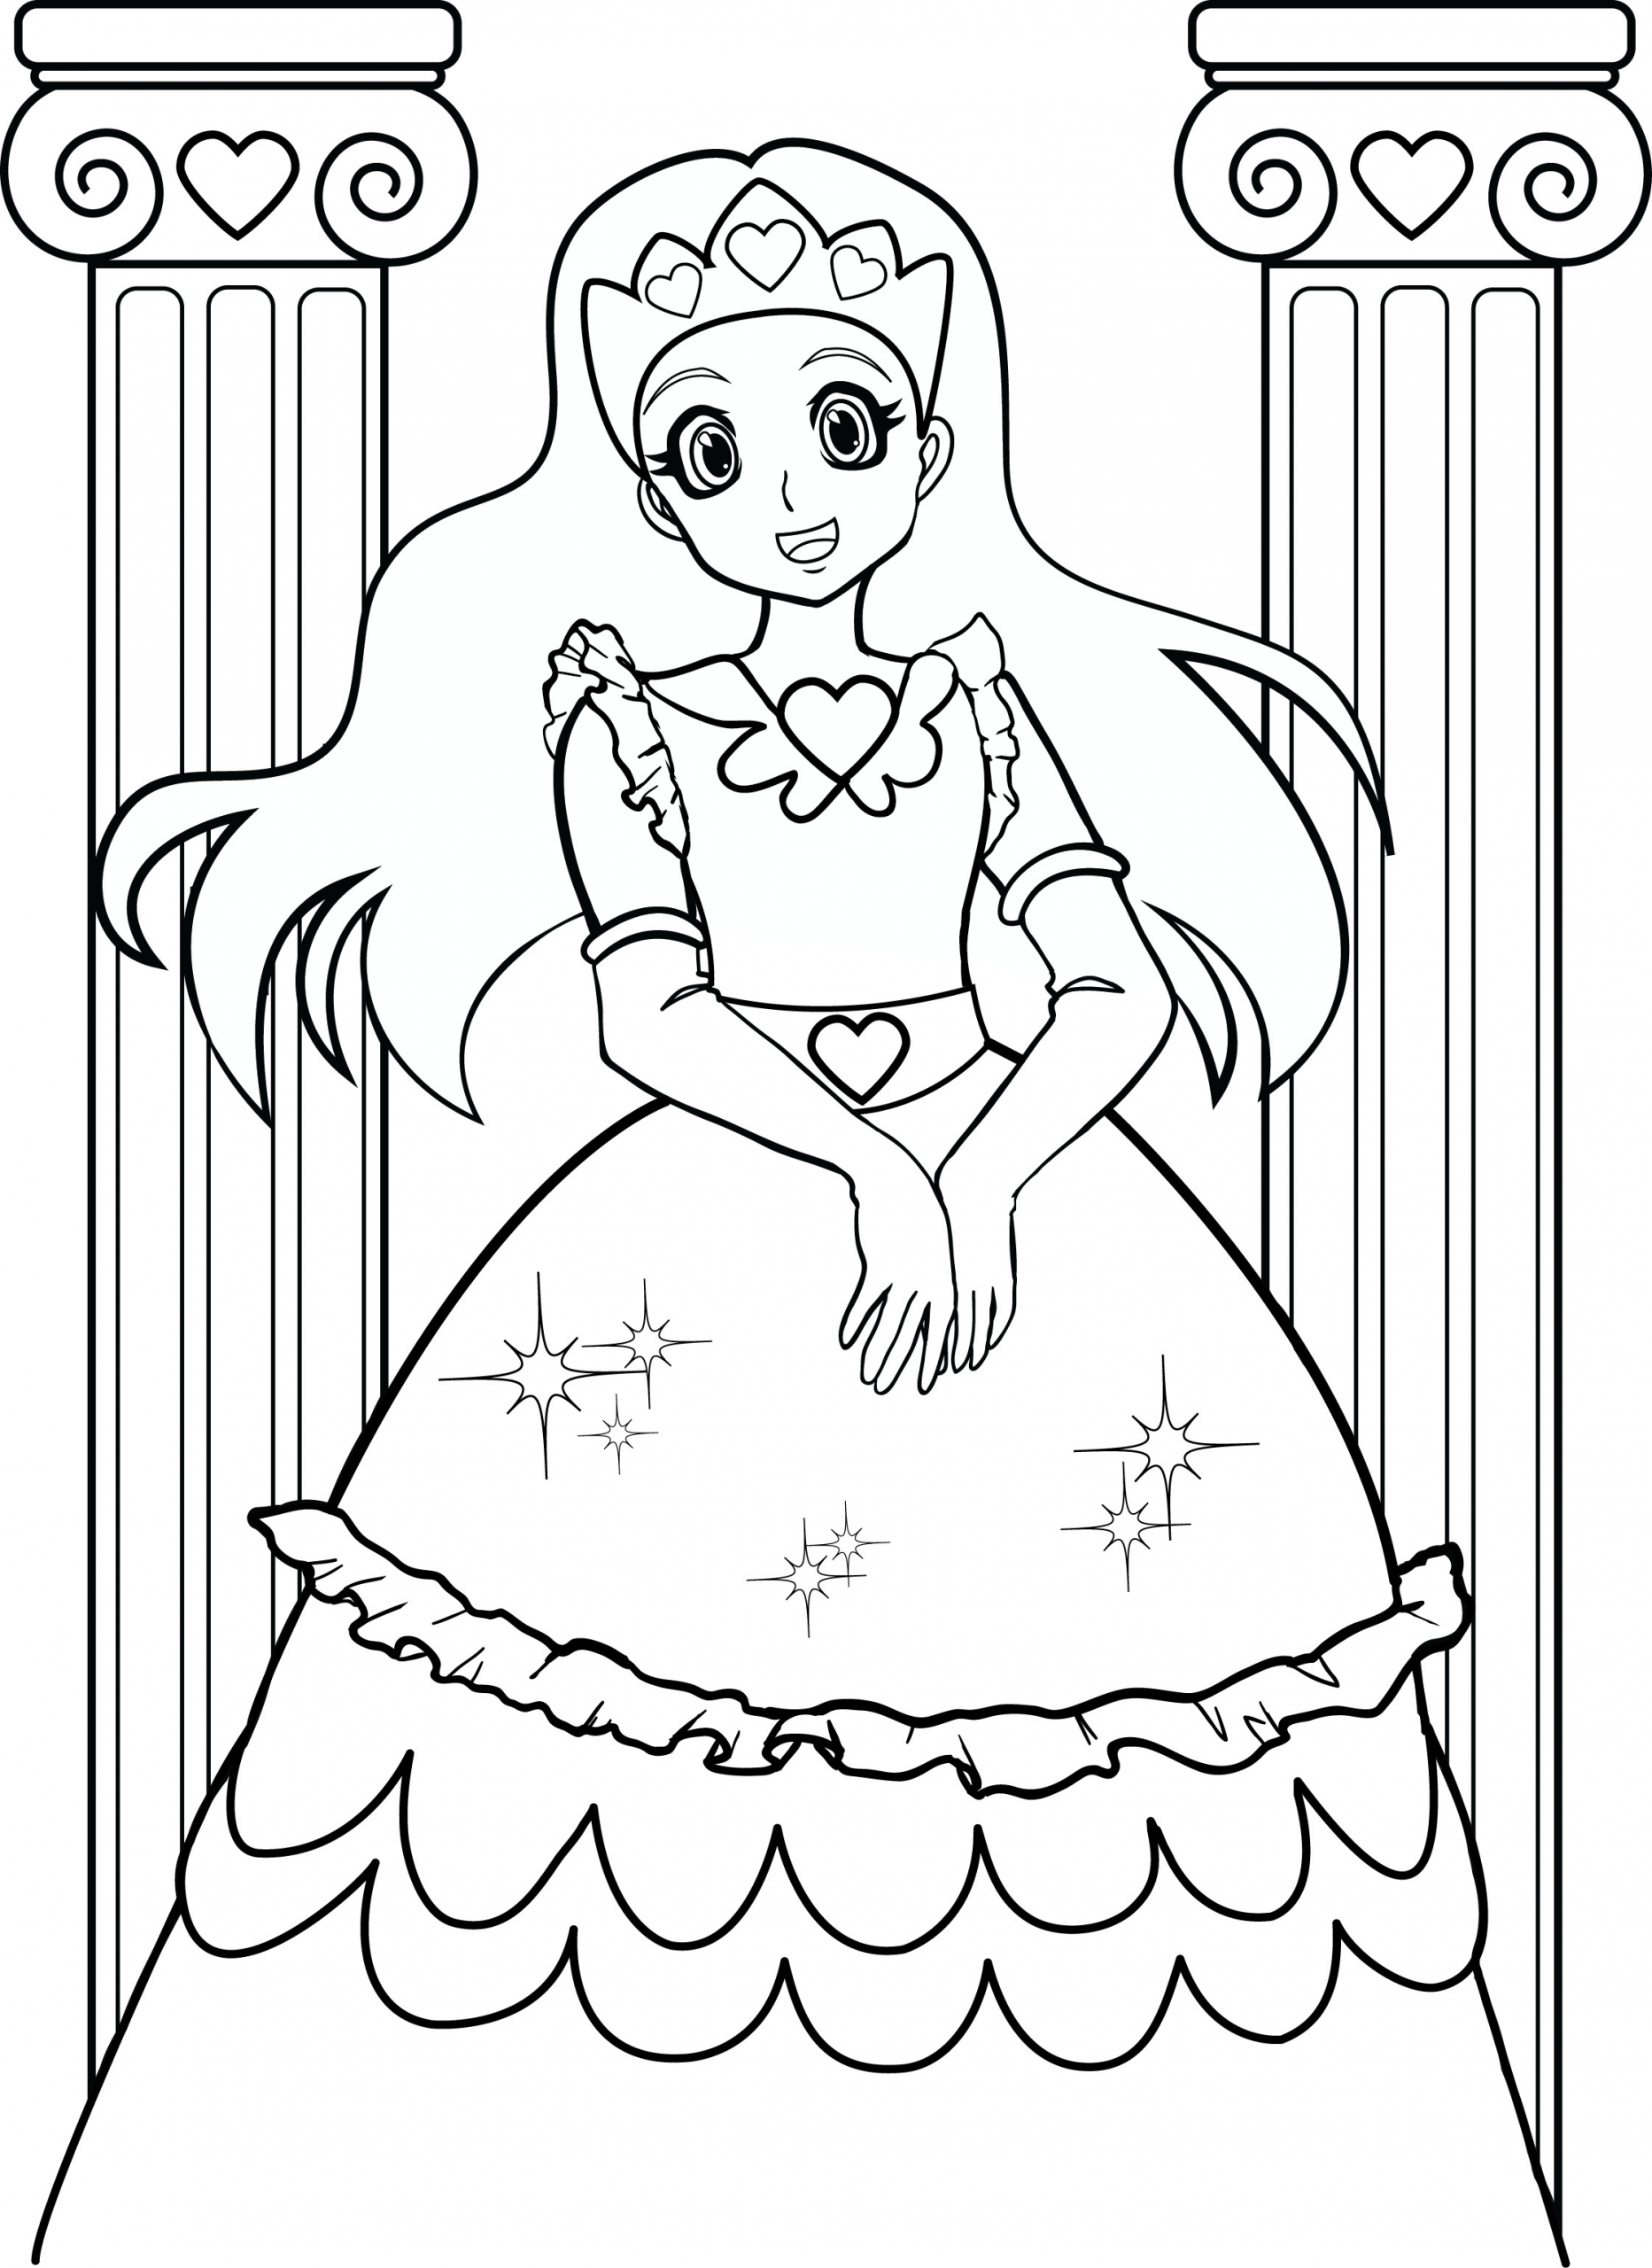 Online Coloring Pages For Girls
 Coloring Pages For Girls 7